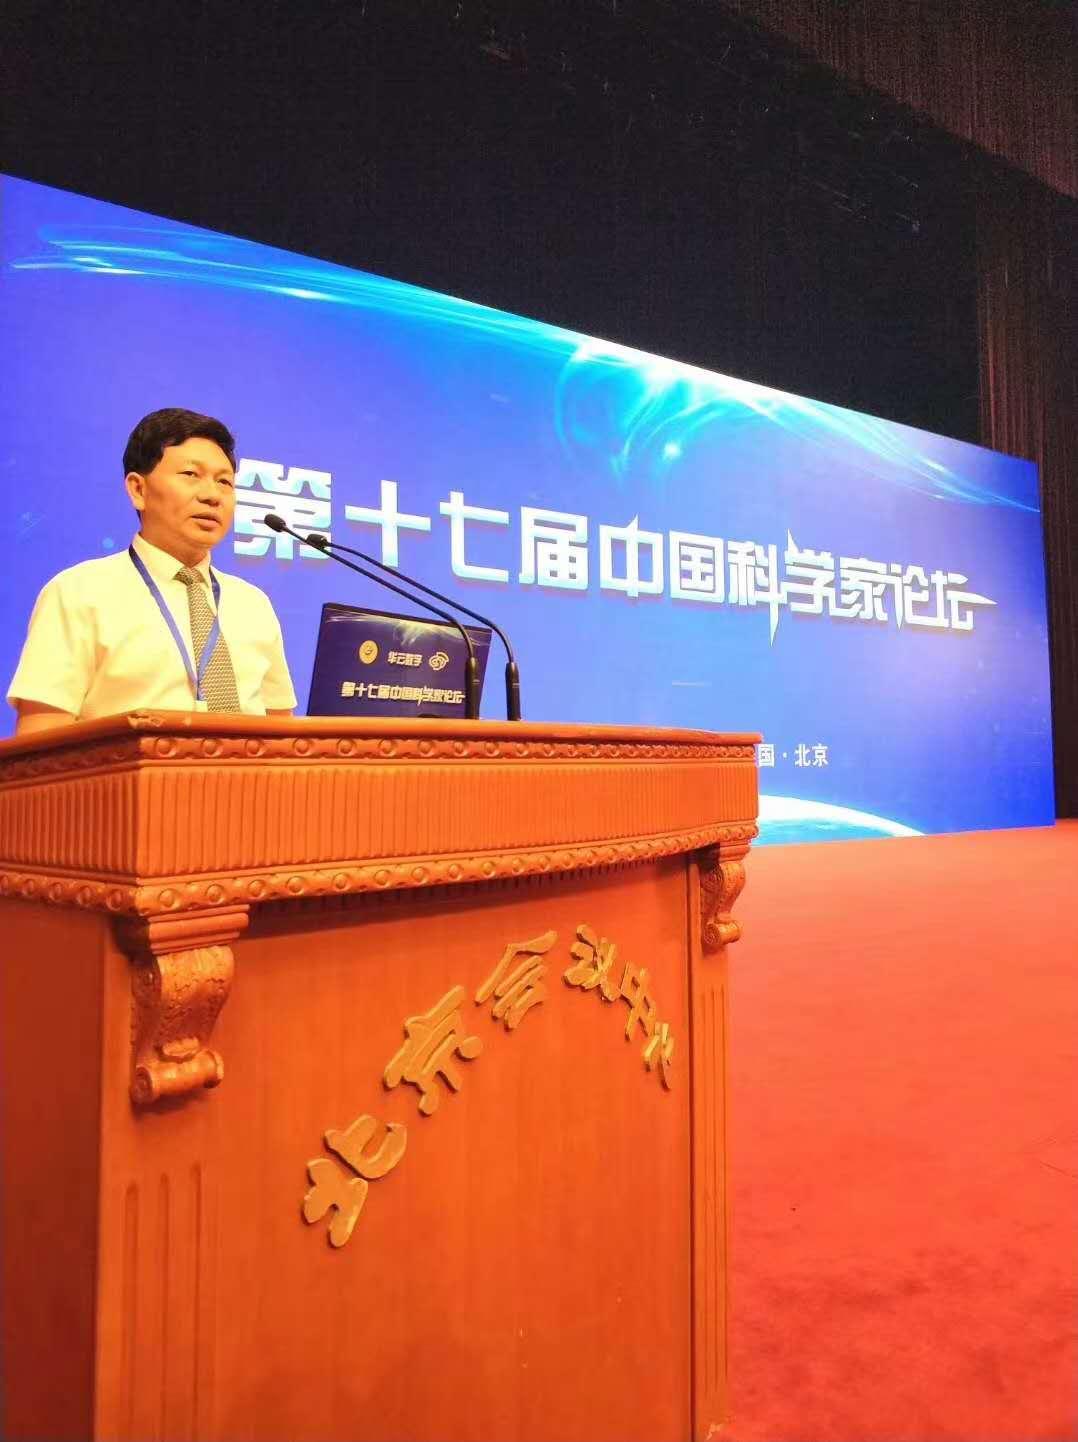 Technological innovation leads the future Dean Li Chengyi was invited to participate in the 17th Chinese Scientists Forum